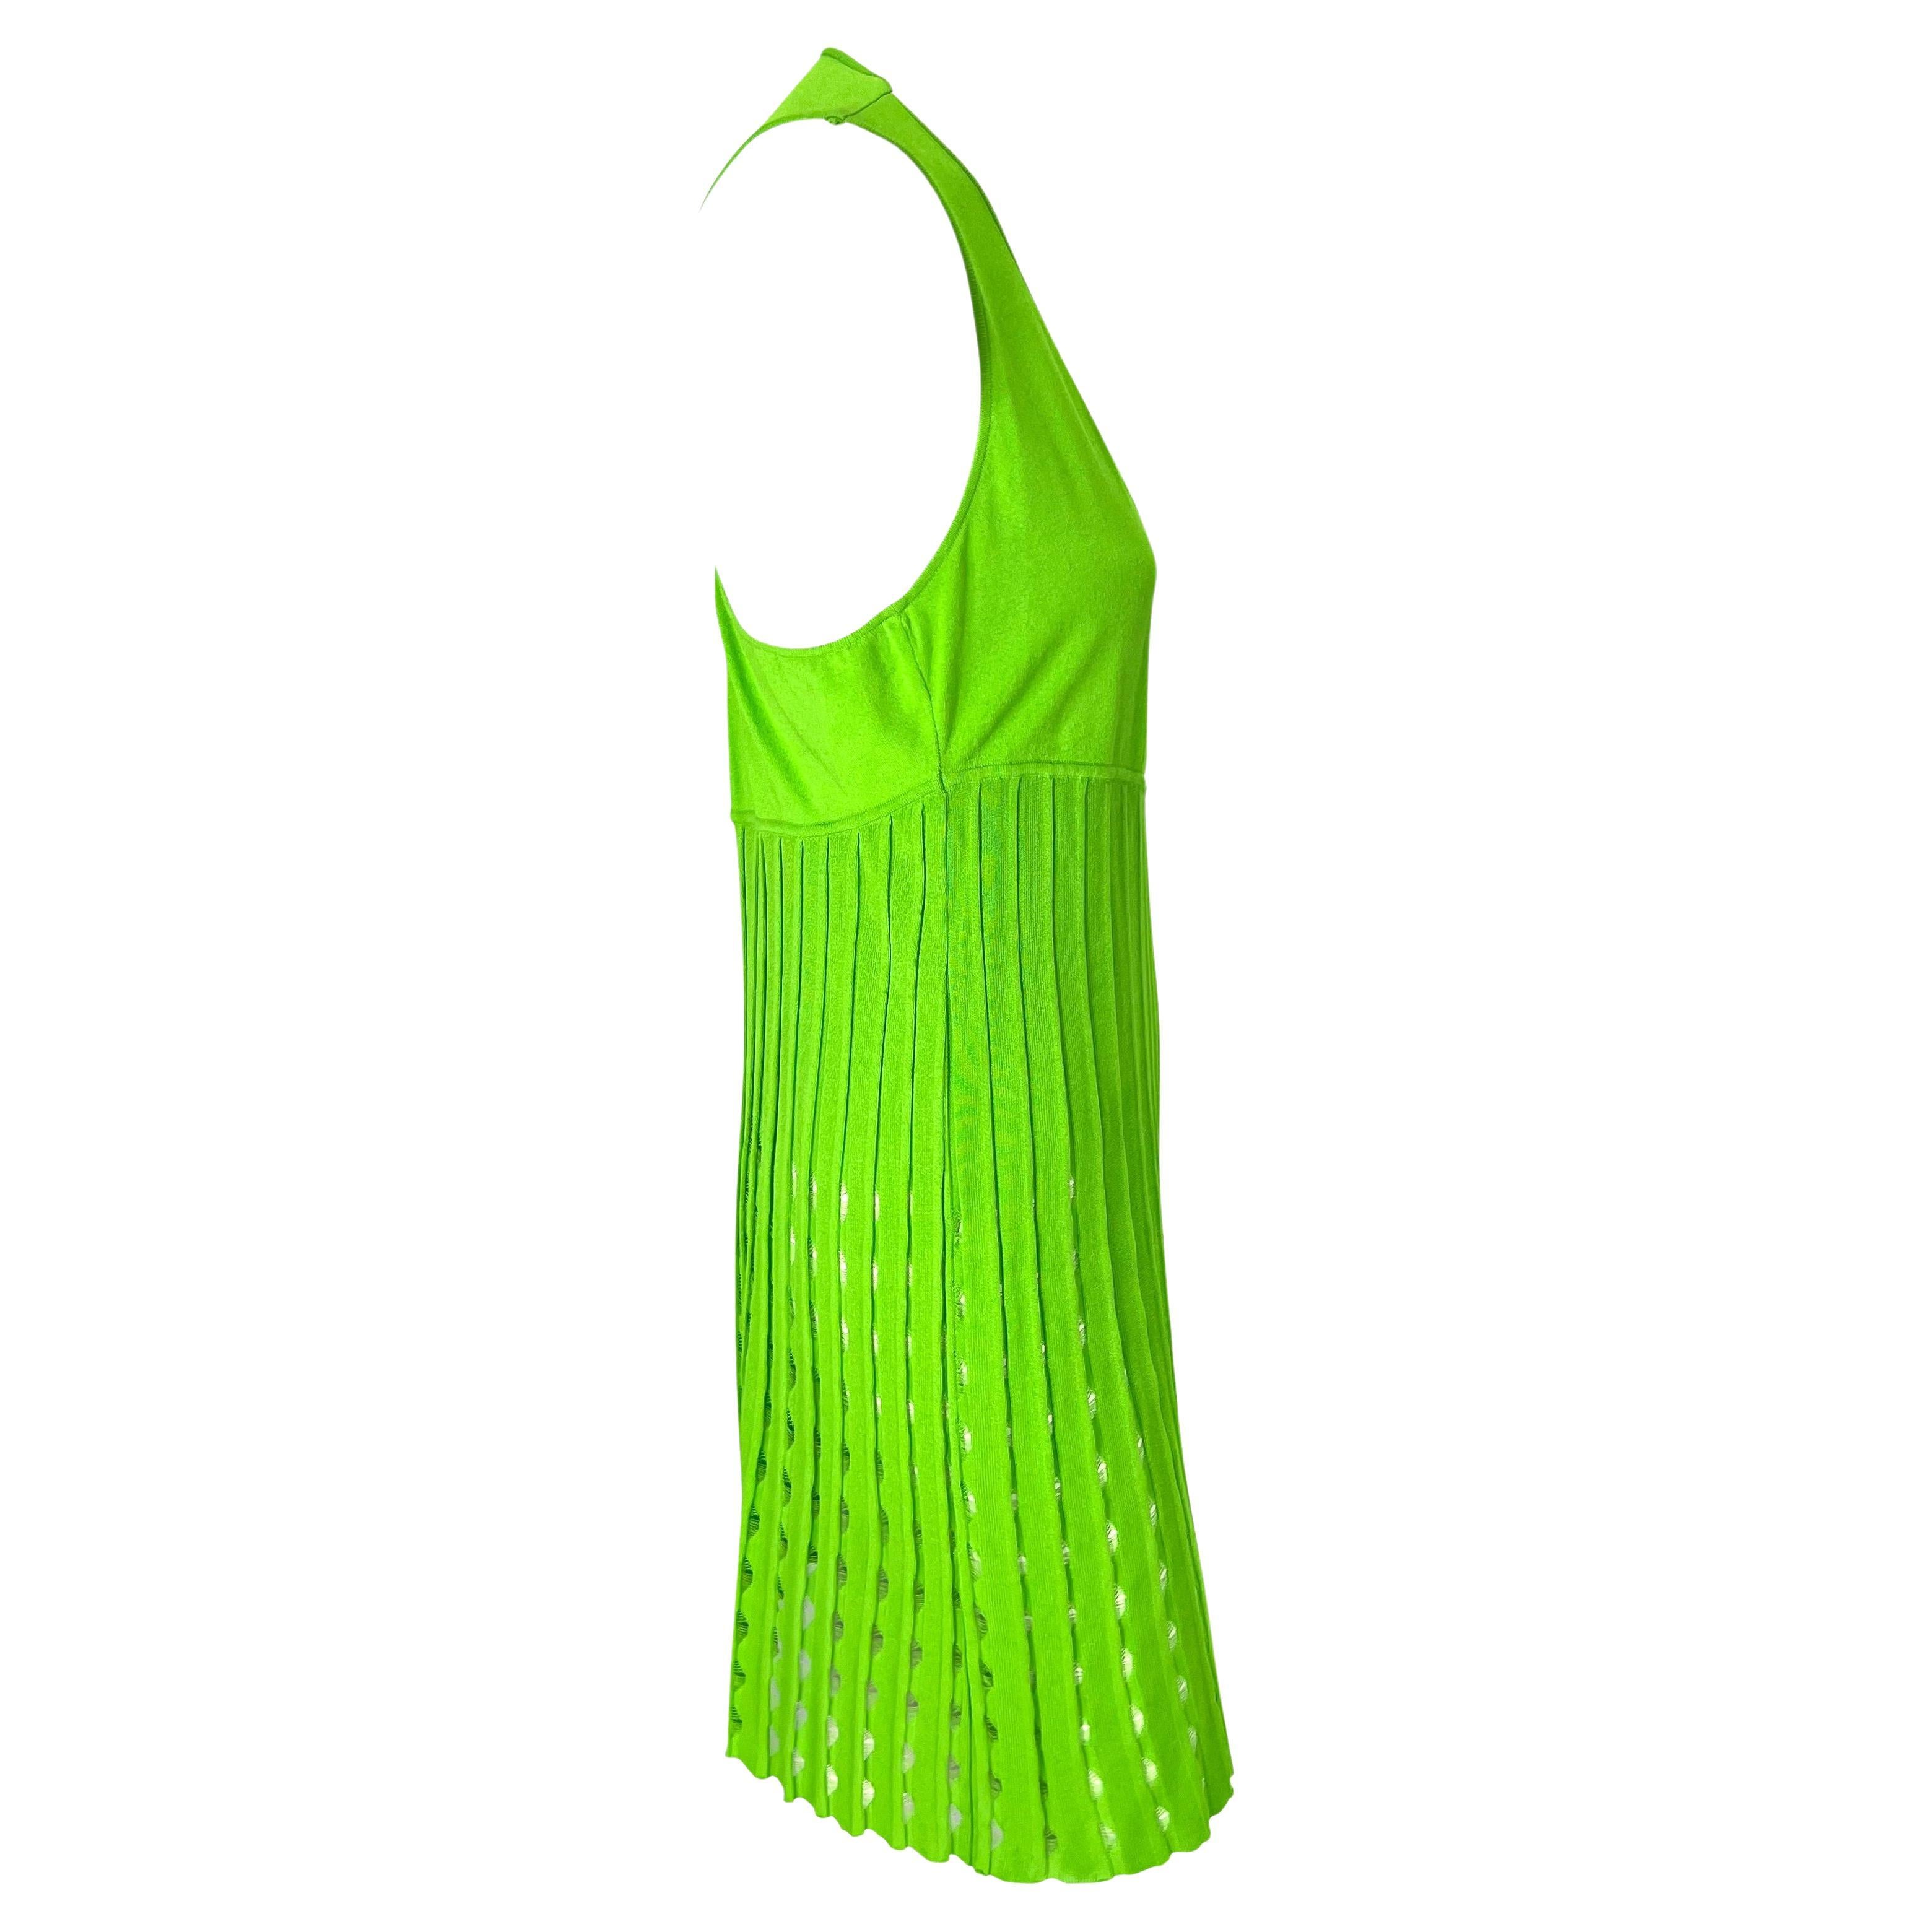 S/S 2003 Gianni Versace by Donatella Neon Green Stretch Knit Eyelet Mini Dress For Sale 1